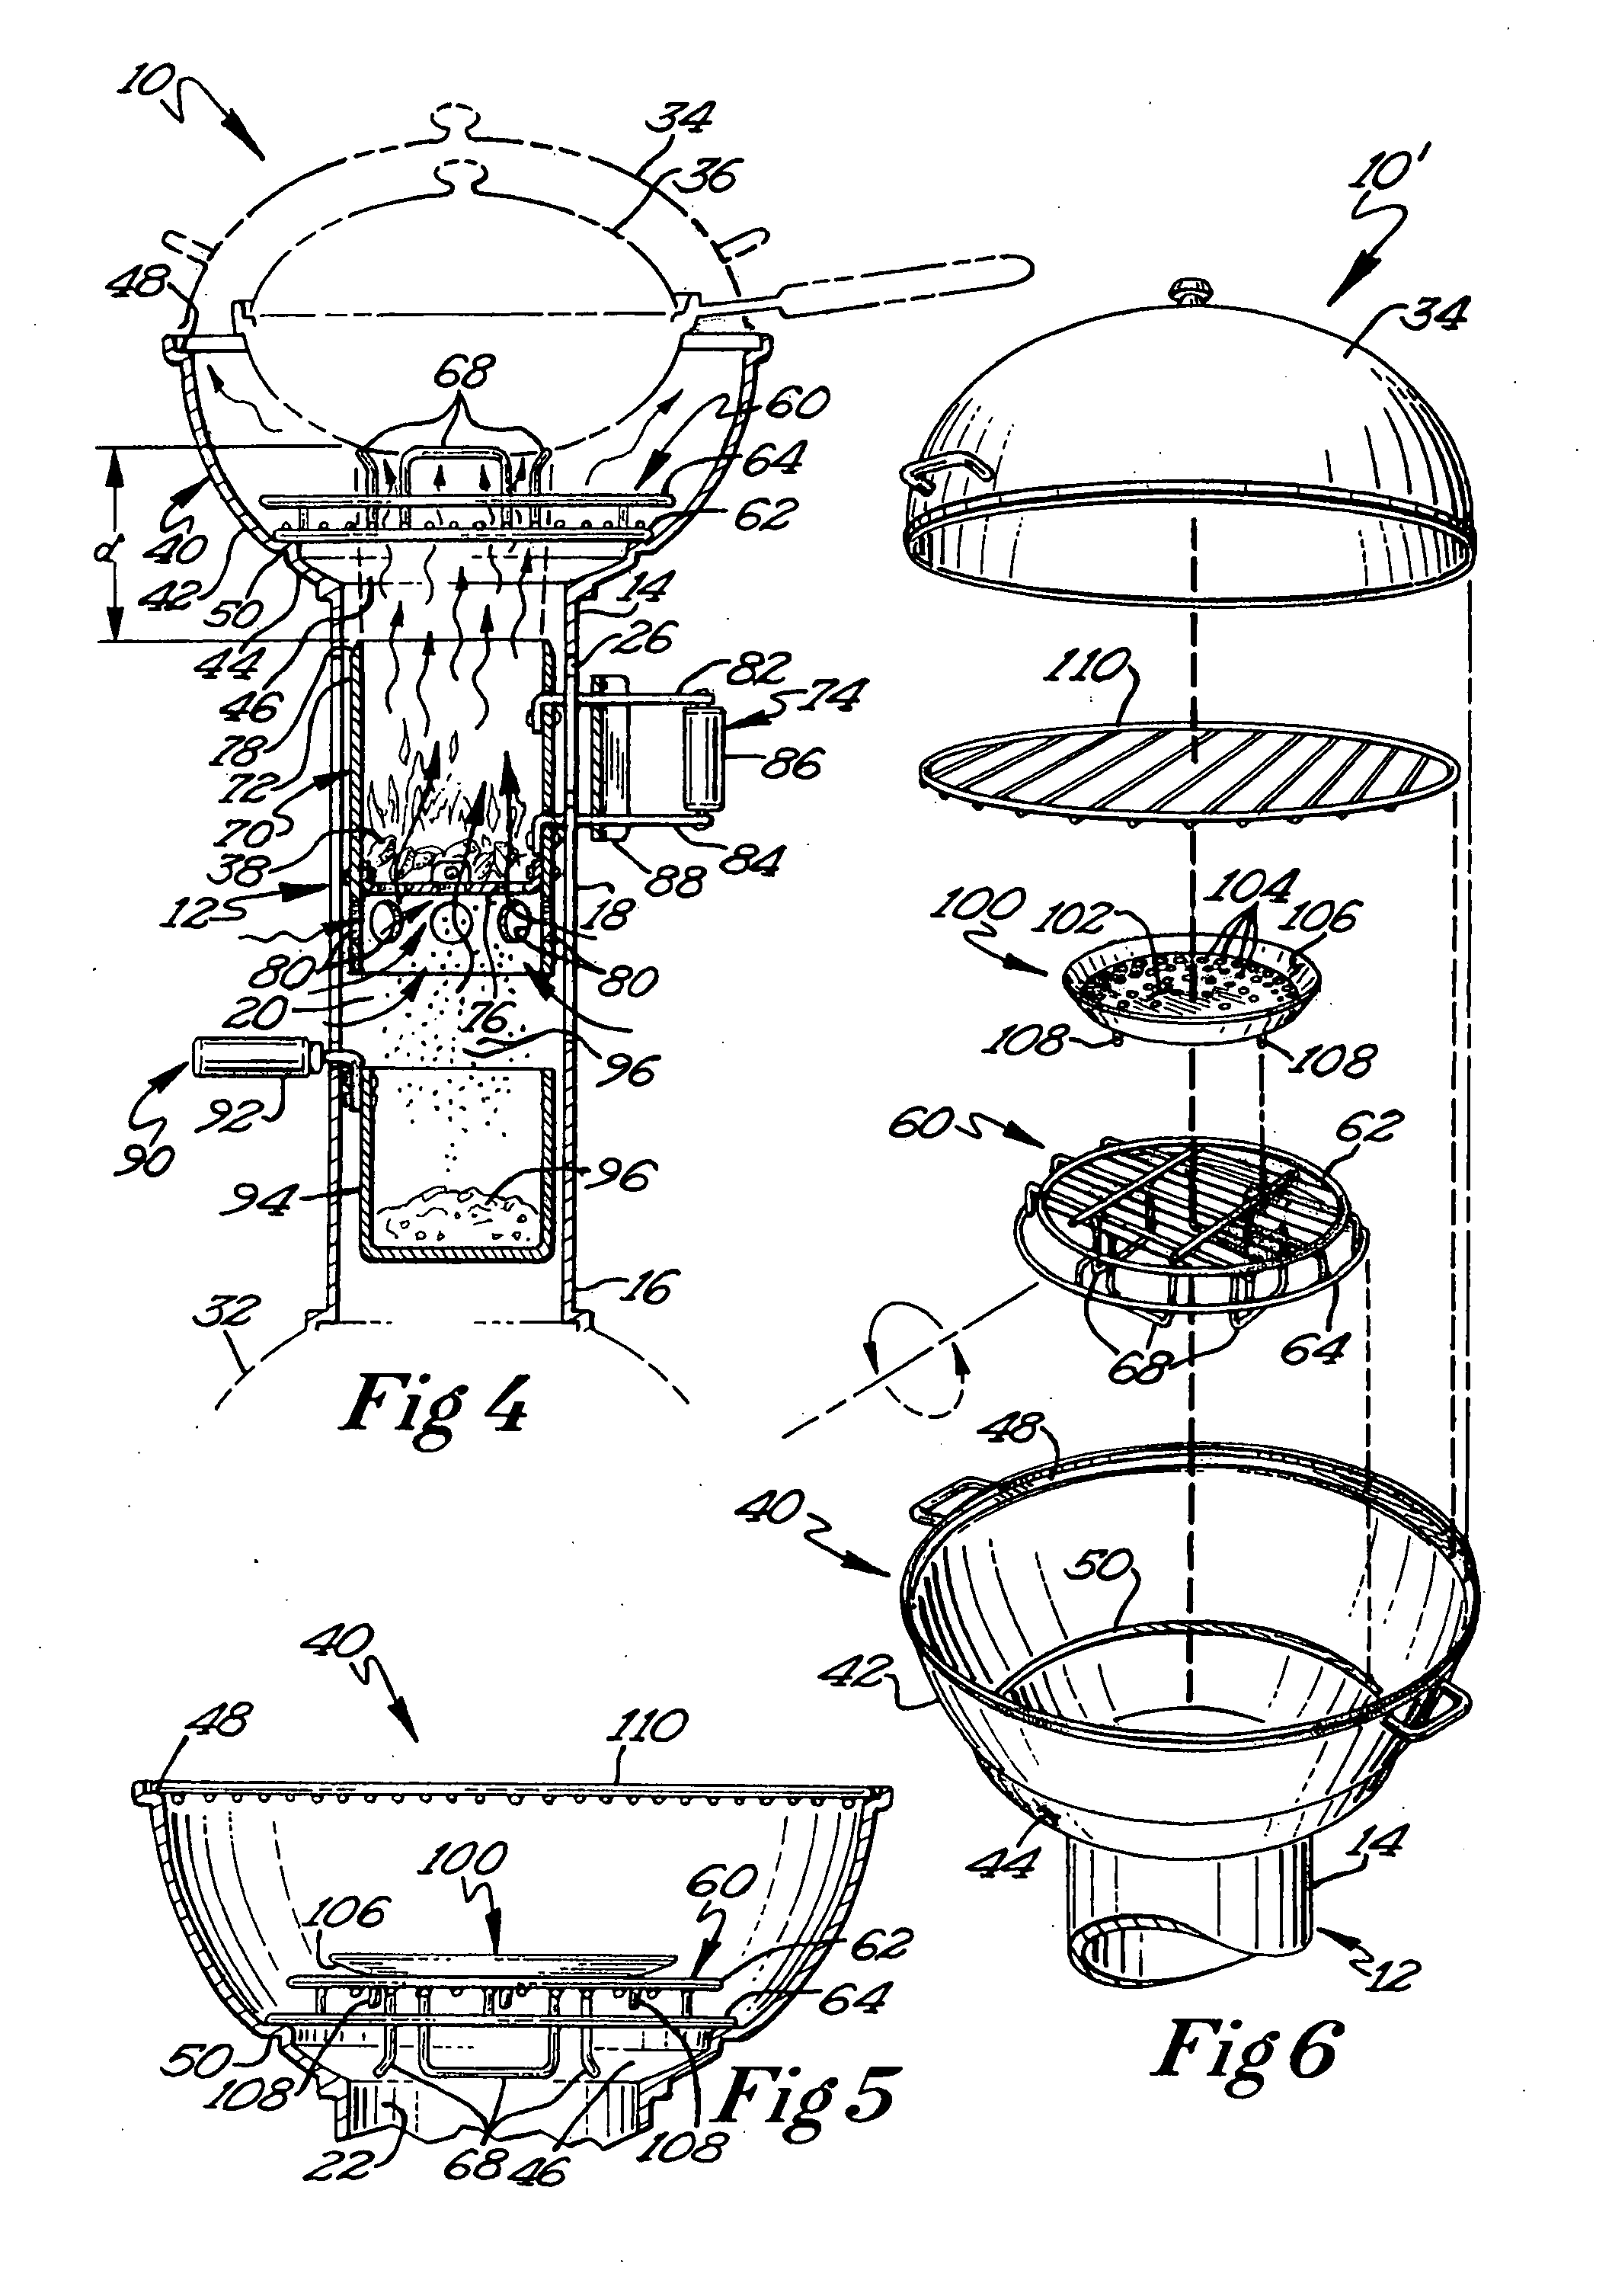 Cooking apparatus and methods of use